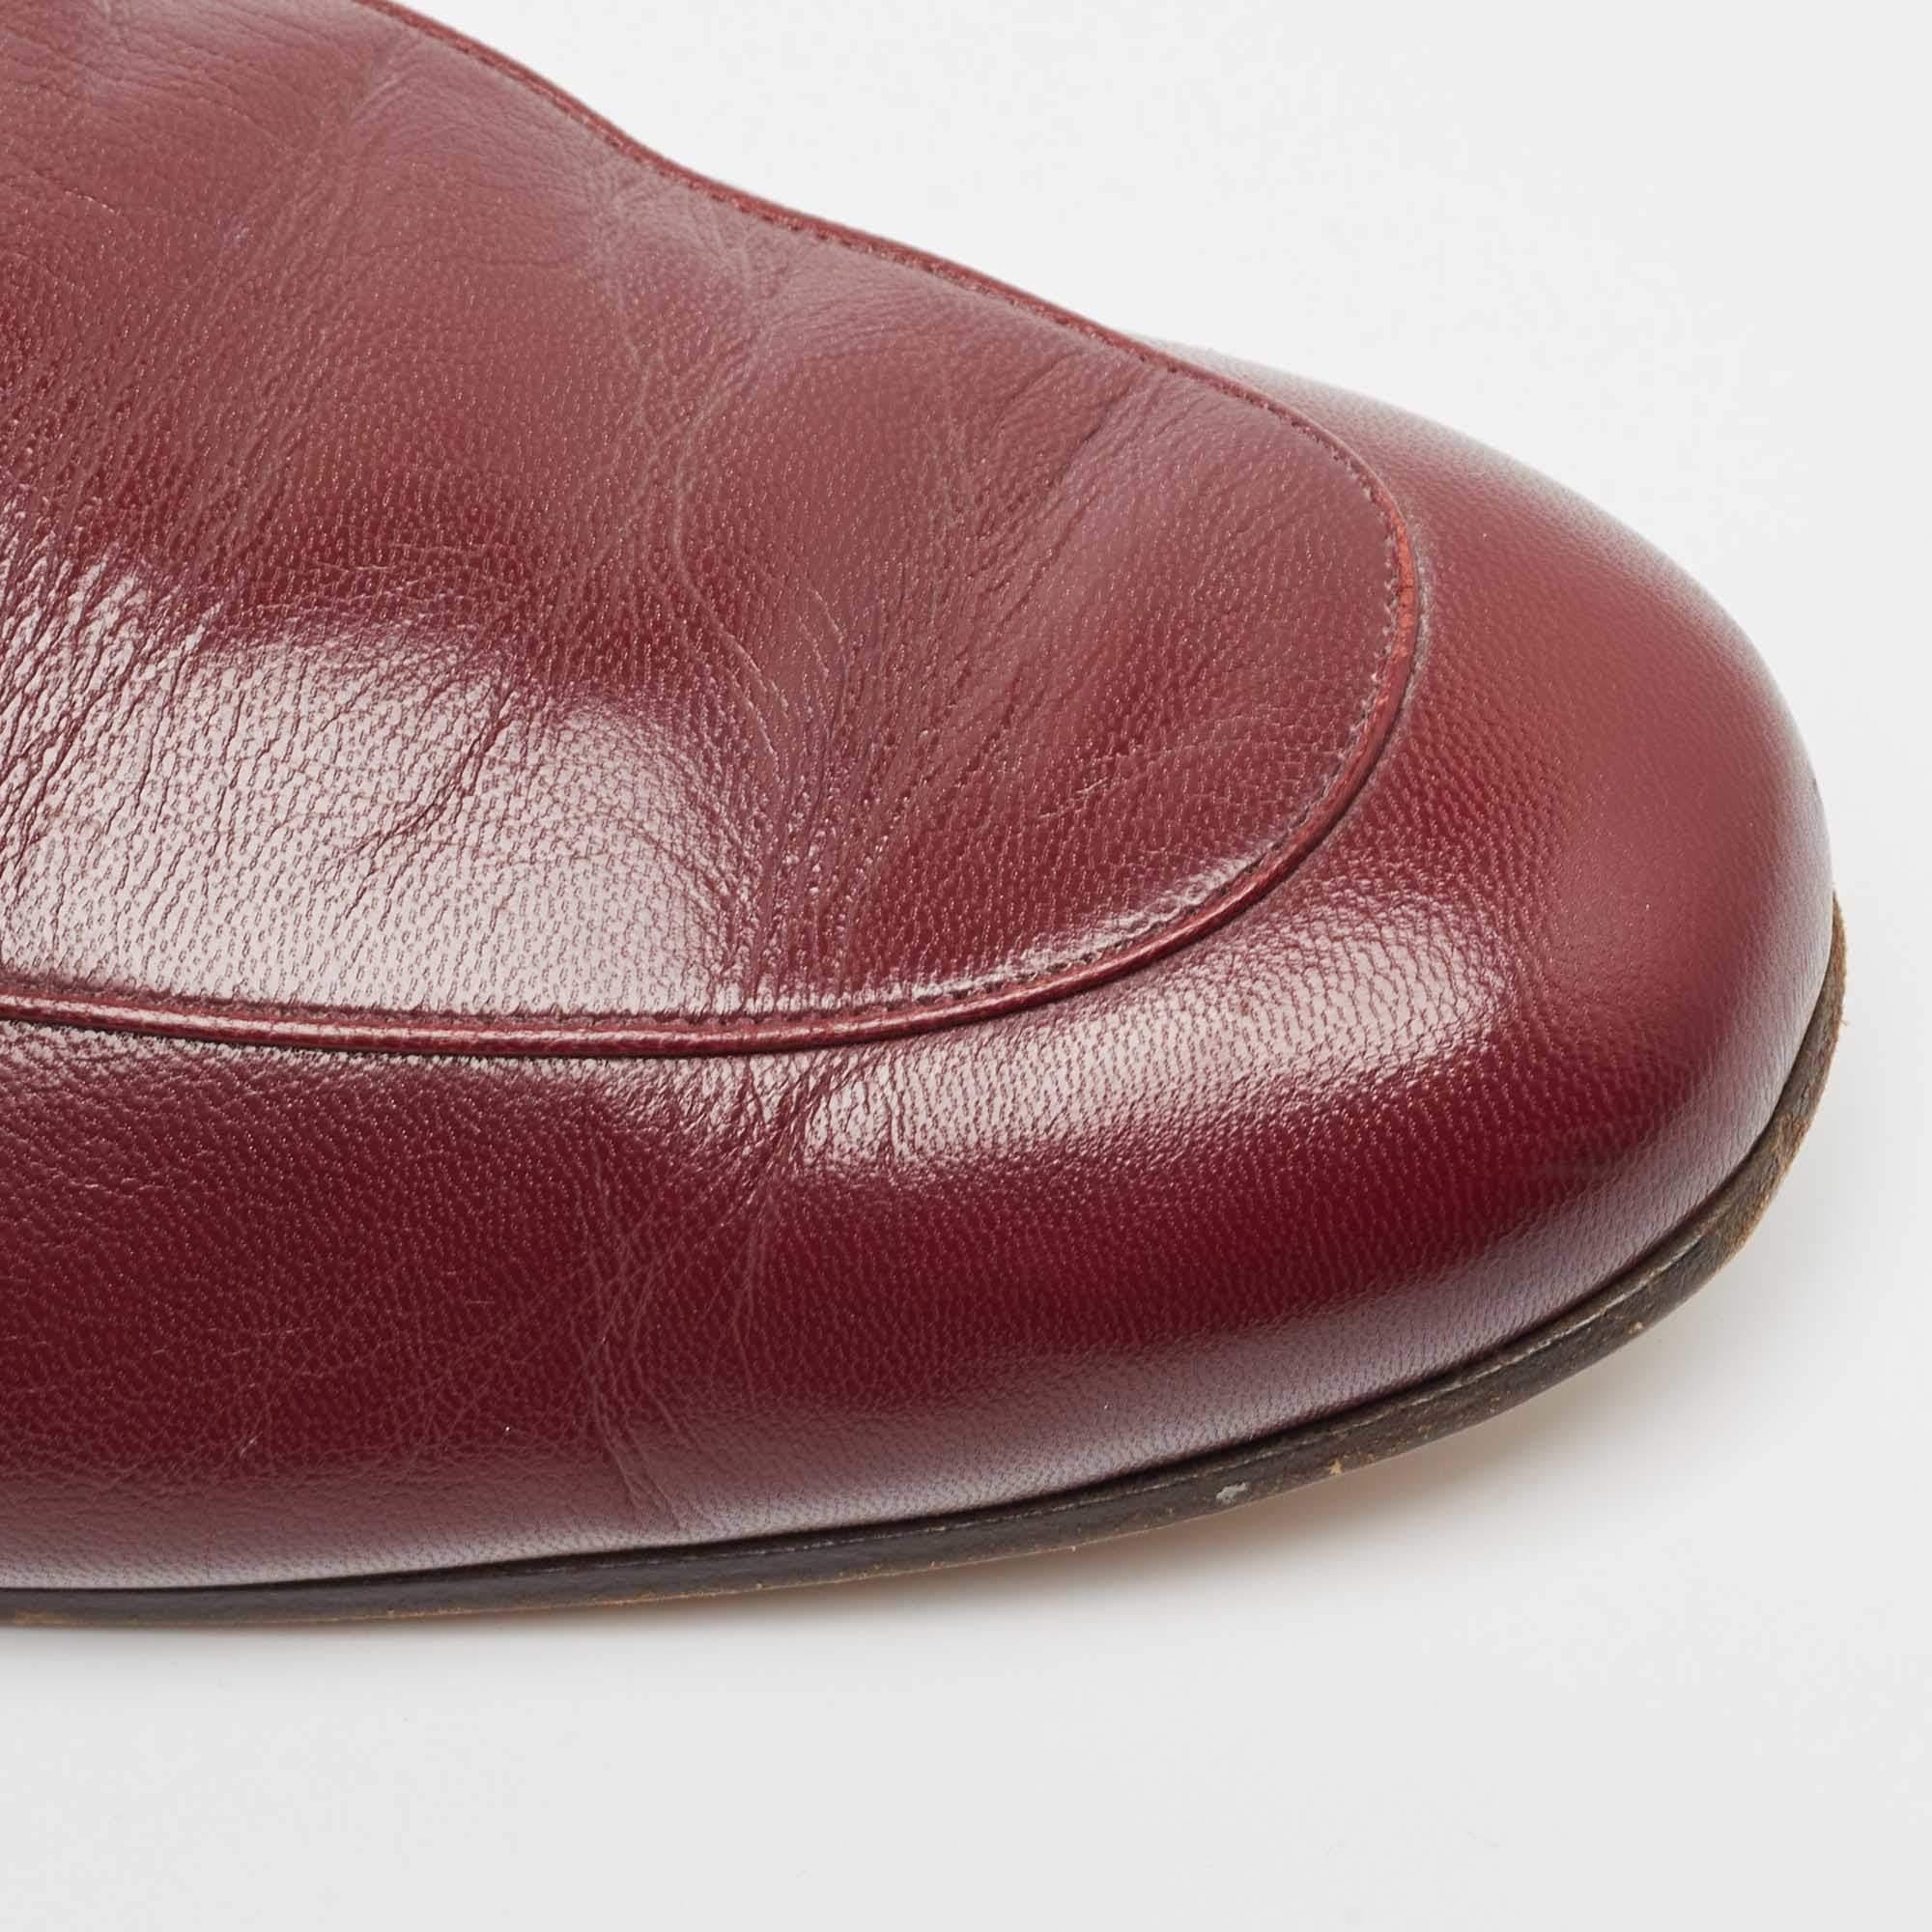 Gucci Princetown Burgundy Leather and Fur Mules Size 45 2